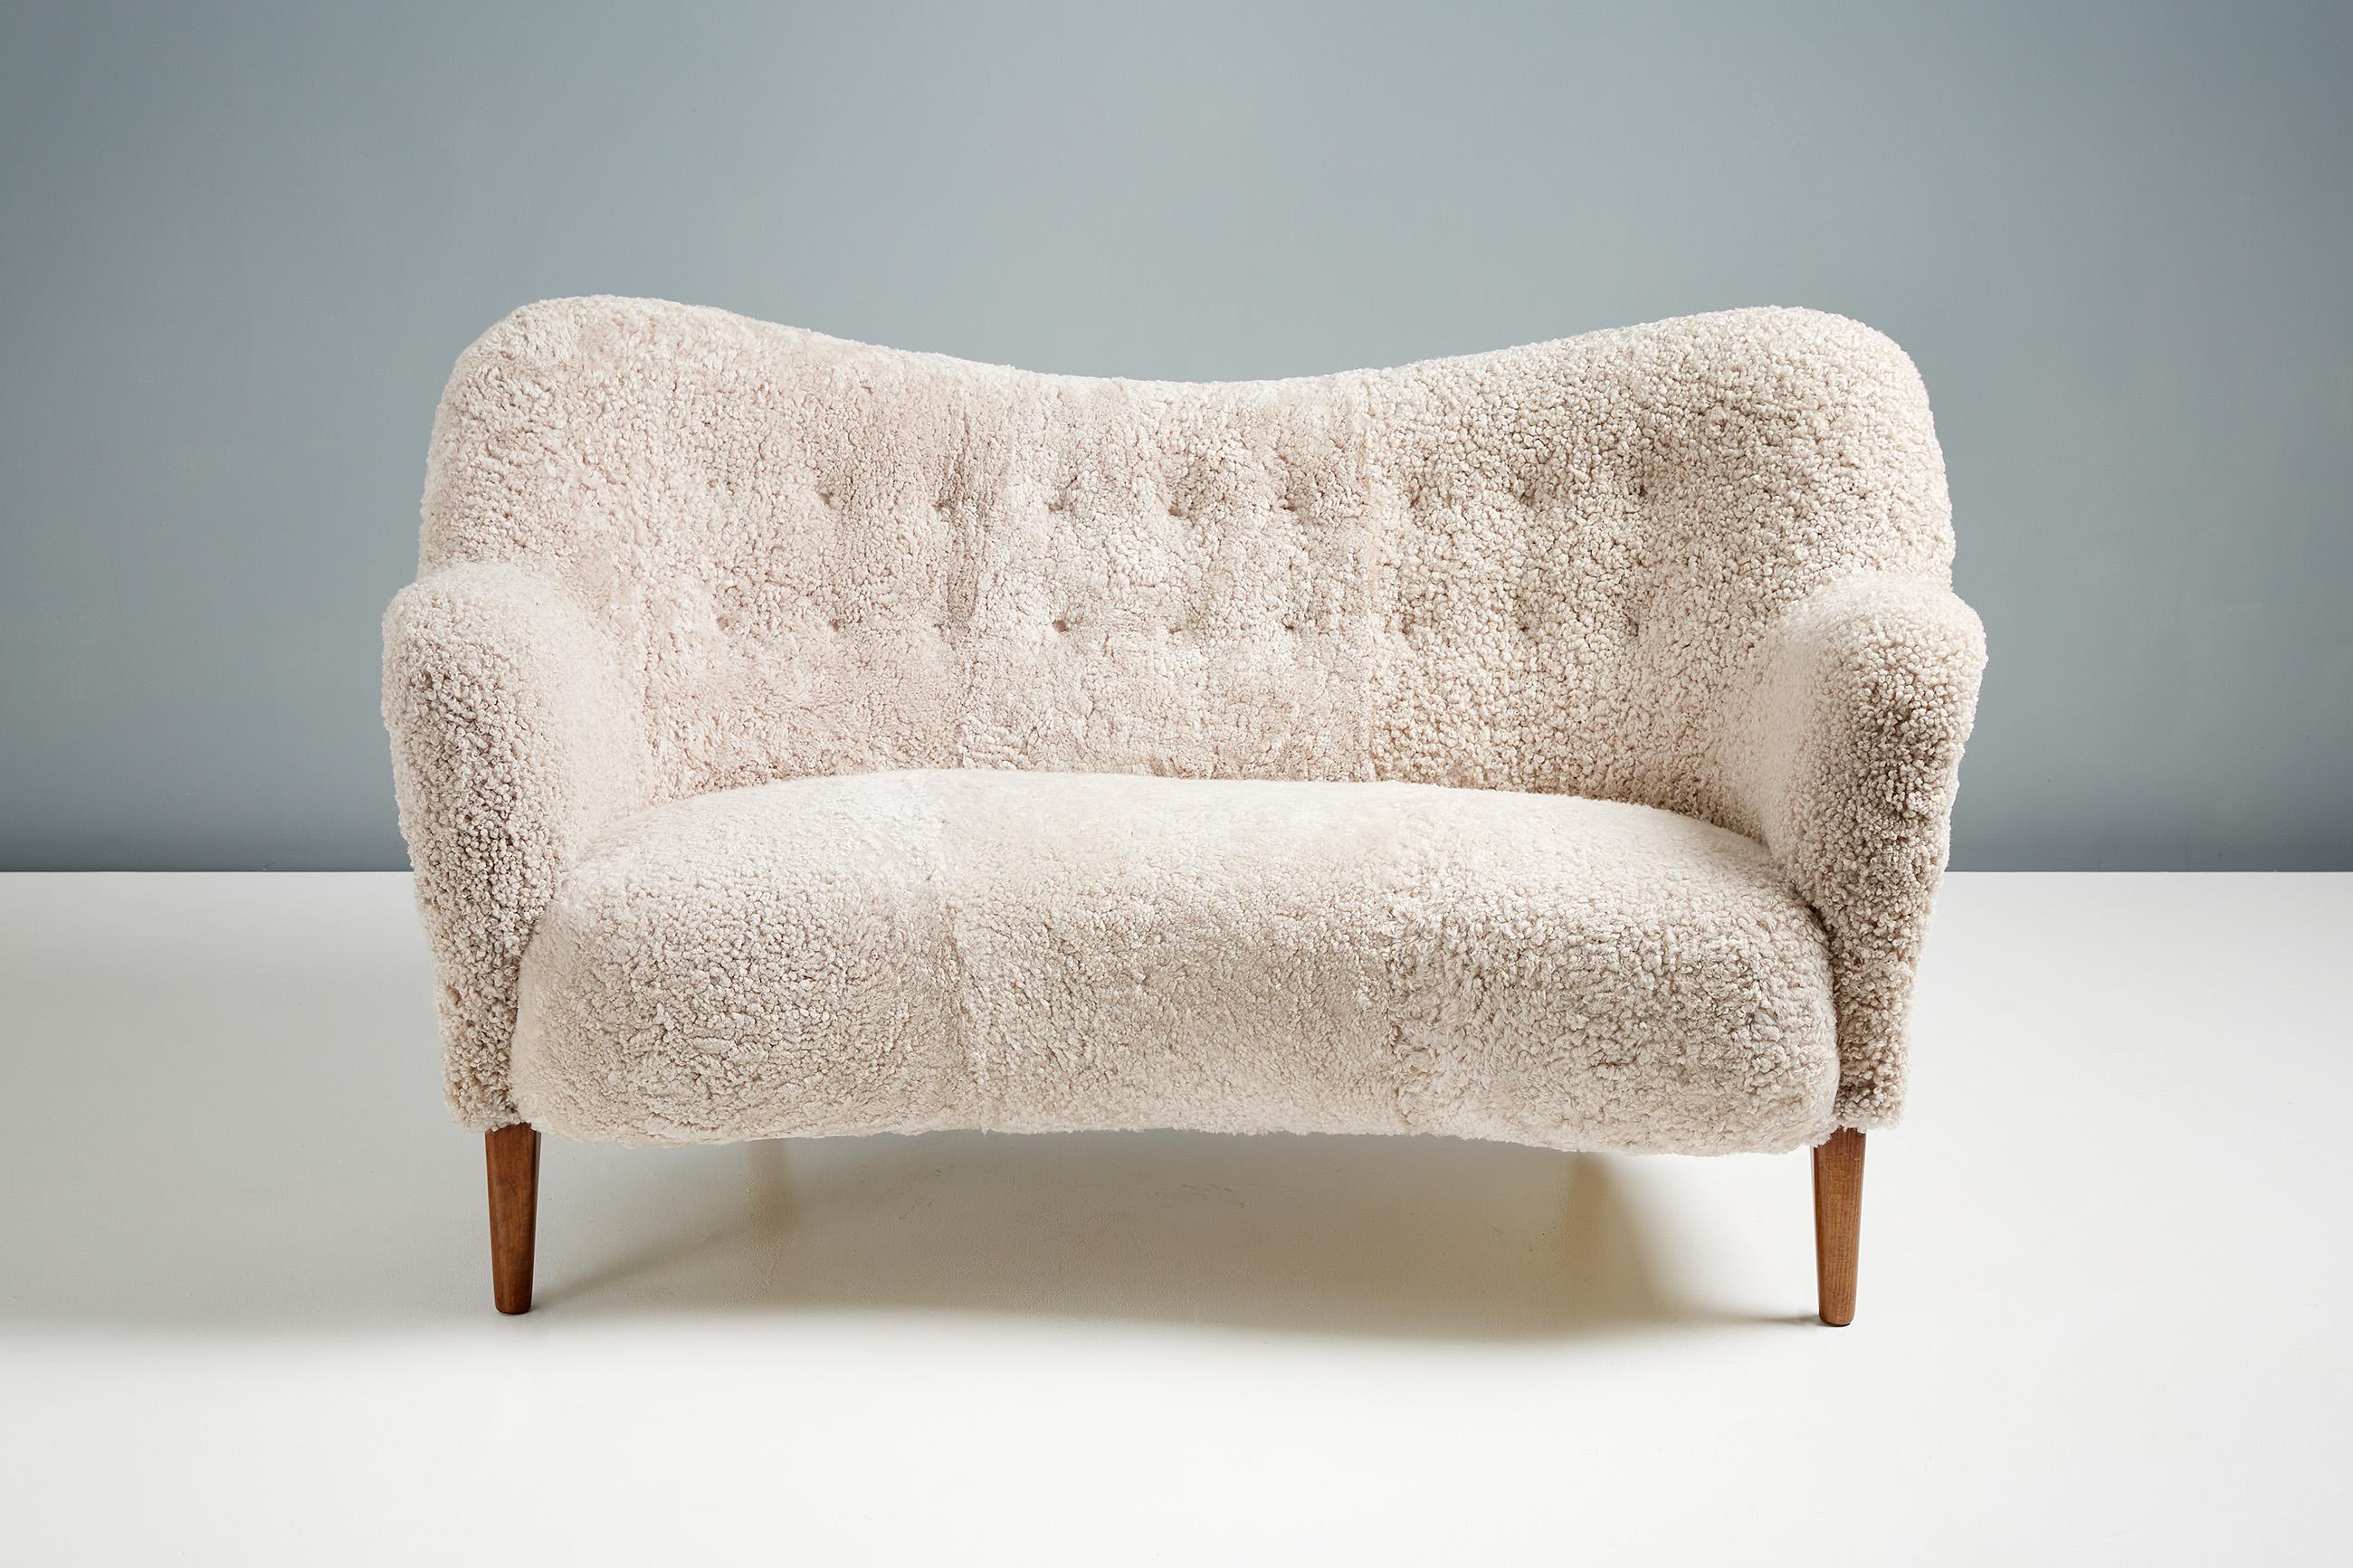 Slagelse Mobelvaerk

Model 185 Sofa, 1952

Rarely seen curved loveseat sofa from Danish cabinetmakers Slagelse Mobelvaerk, which has been variously and erroneously attributed to both Nanna Ditzel and Finn Juhl previously. This example has oiled